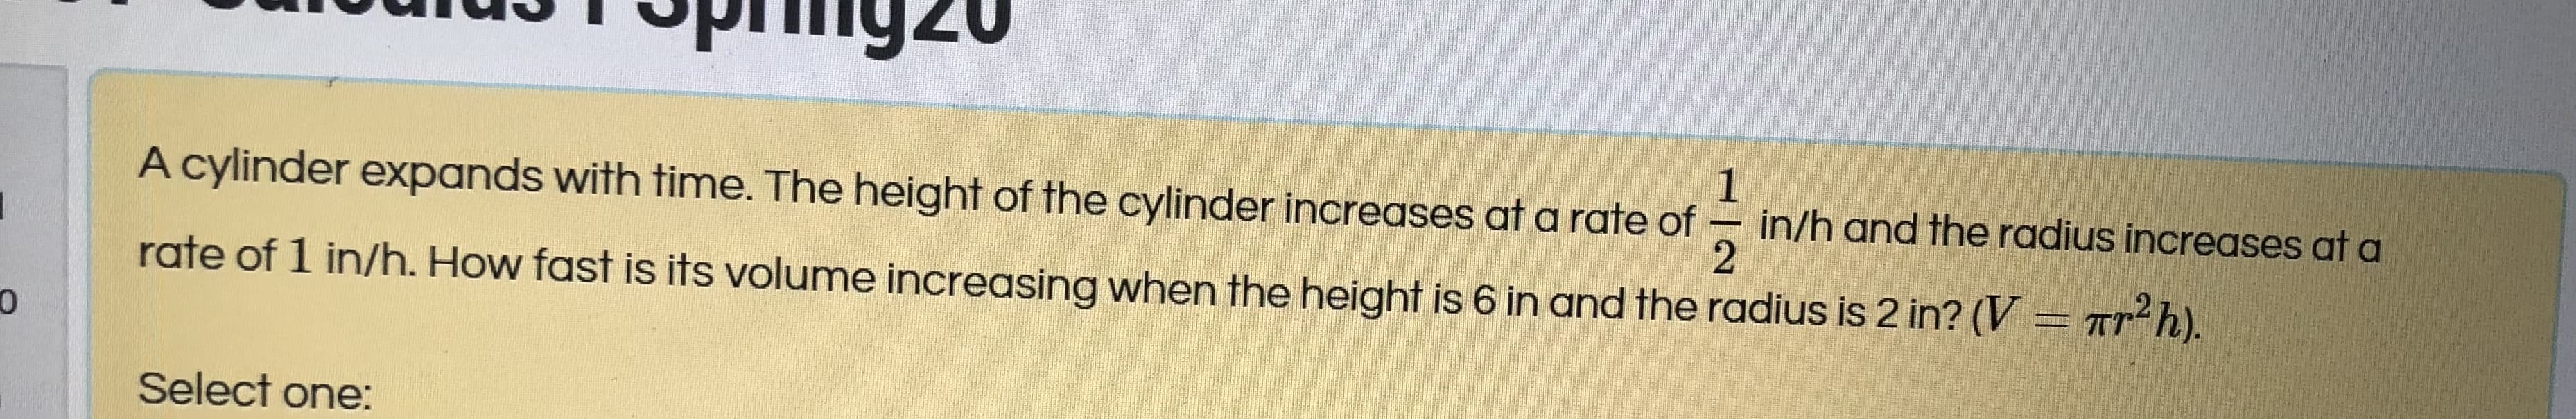 A cylinder expands with time. The height of the cylinder increases at a rate of
1
in/h and the radius increases at a
ate of 1 in/h. How fast is its volume increasing when the height is 6 in and the radius is 2 in? (V = Tr²h).
